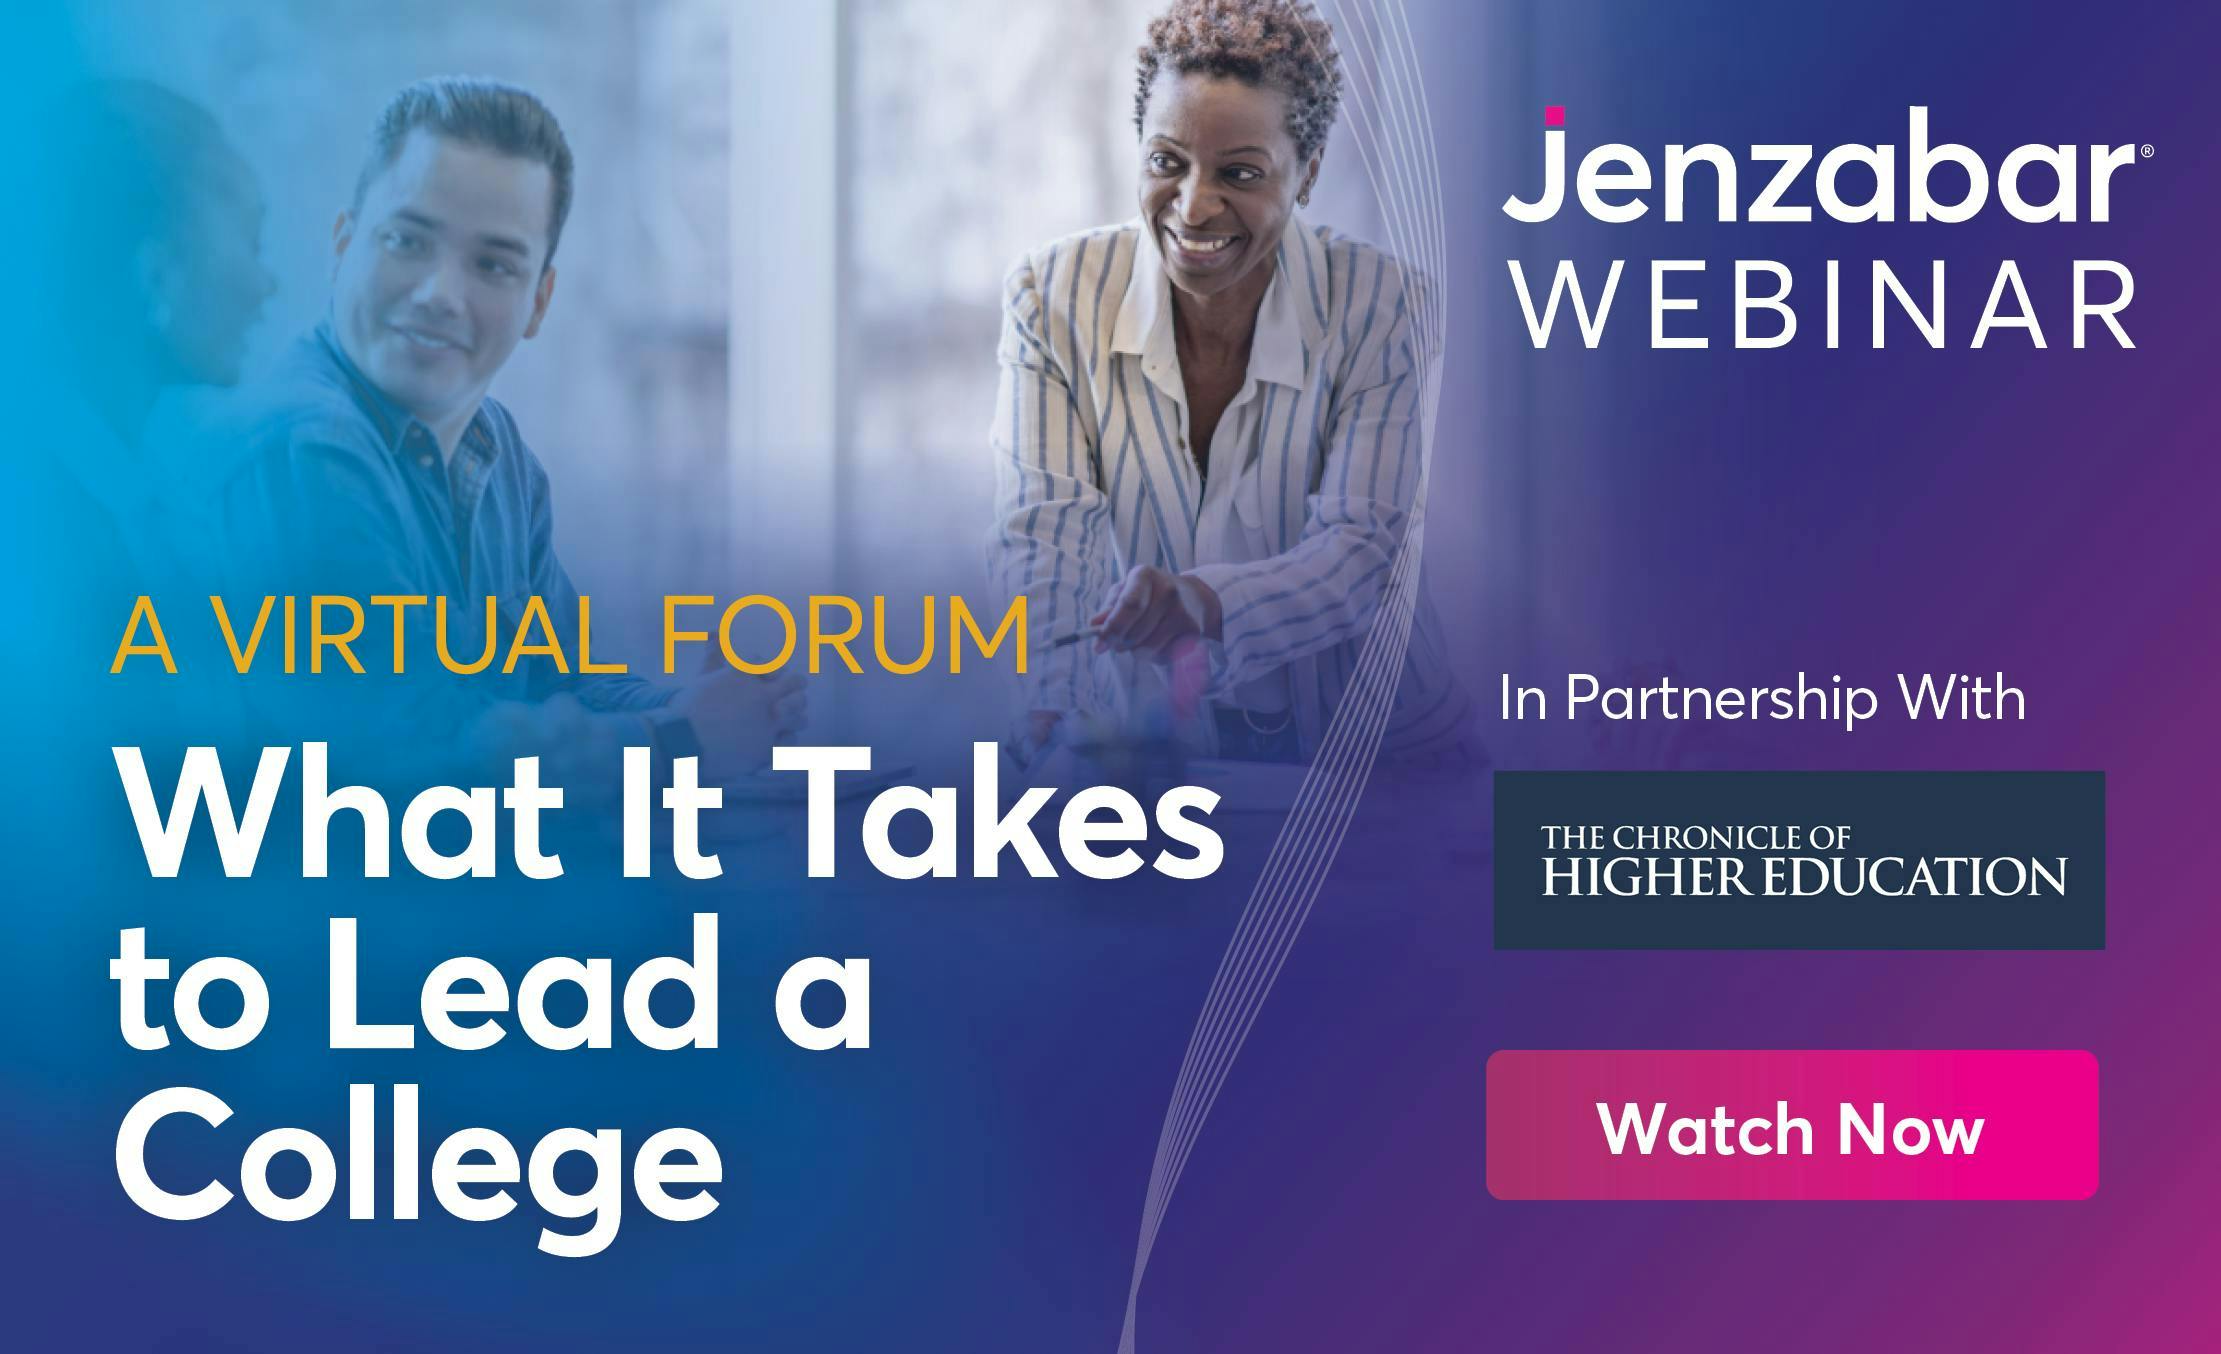 Webinar: What It Takes to Lead a College